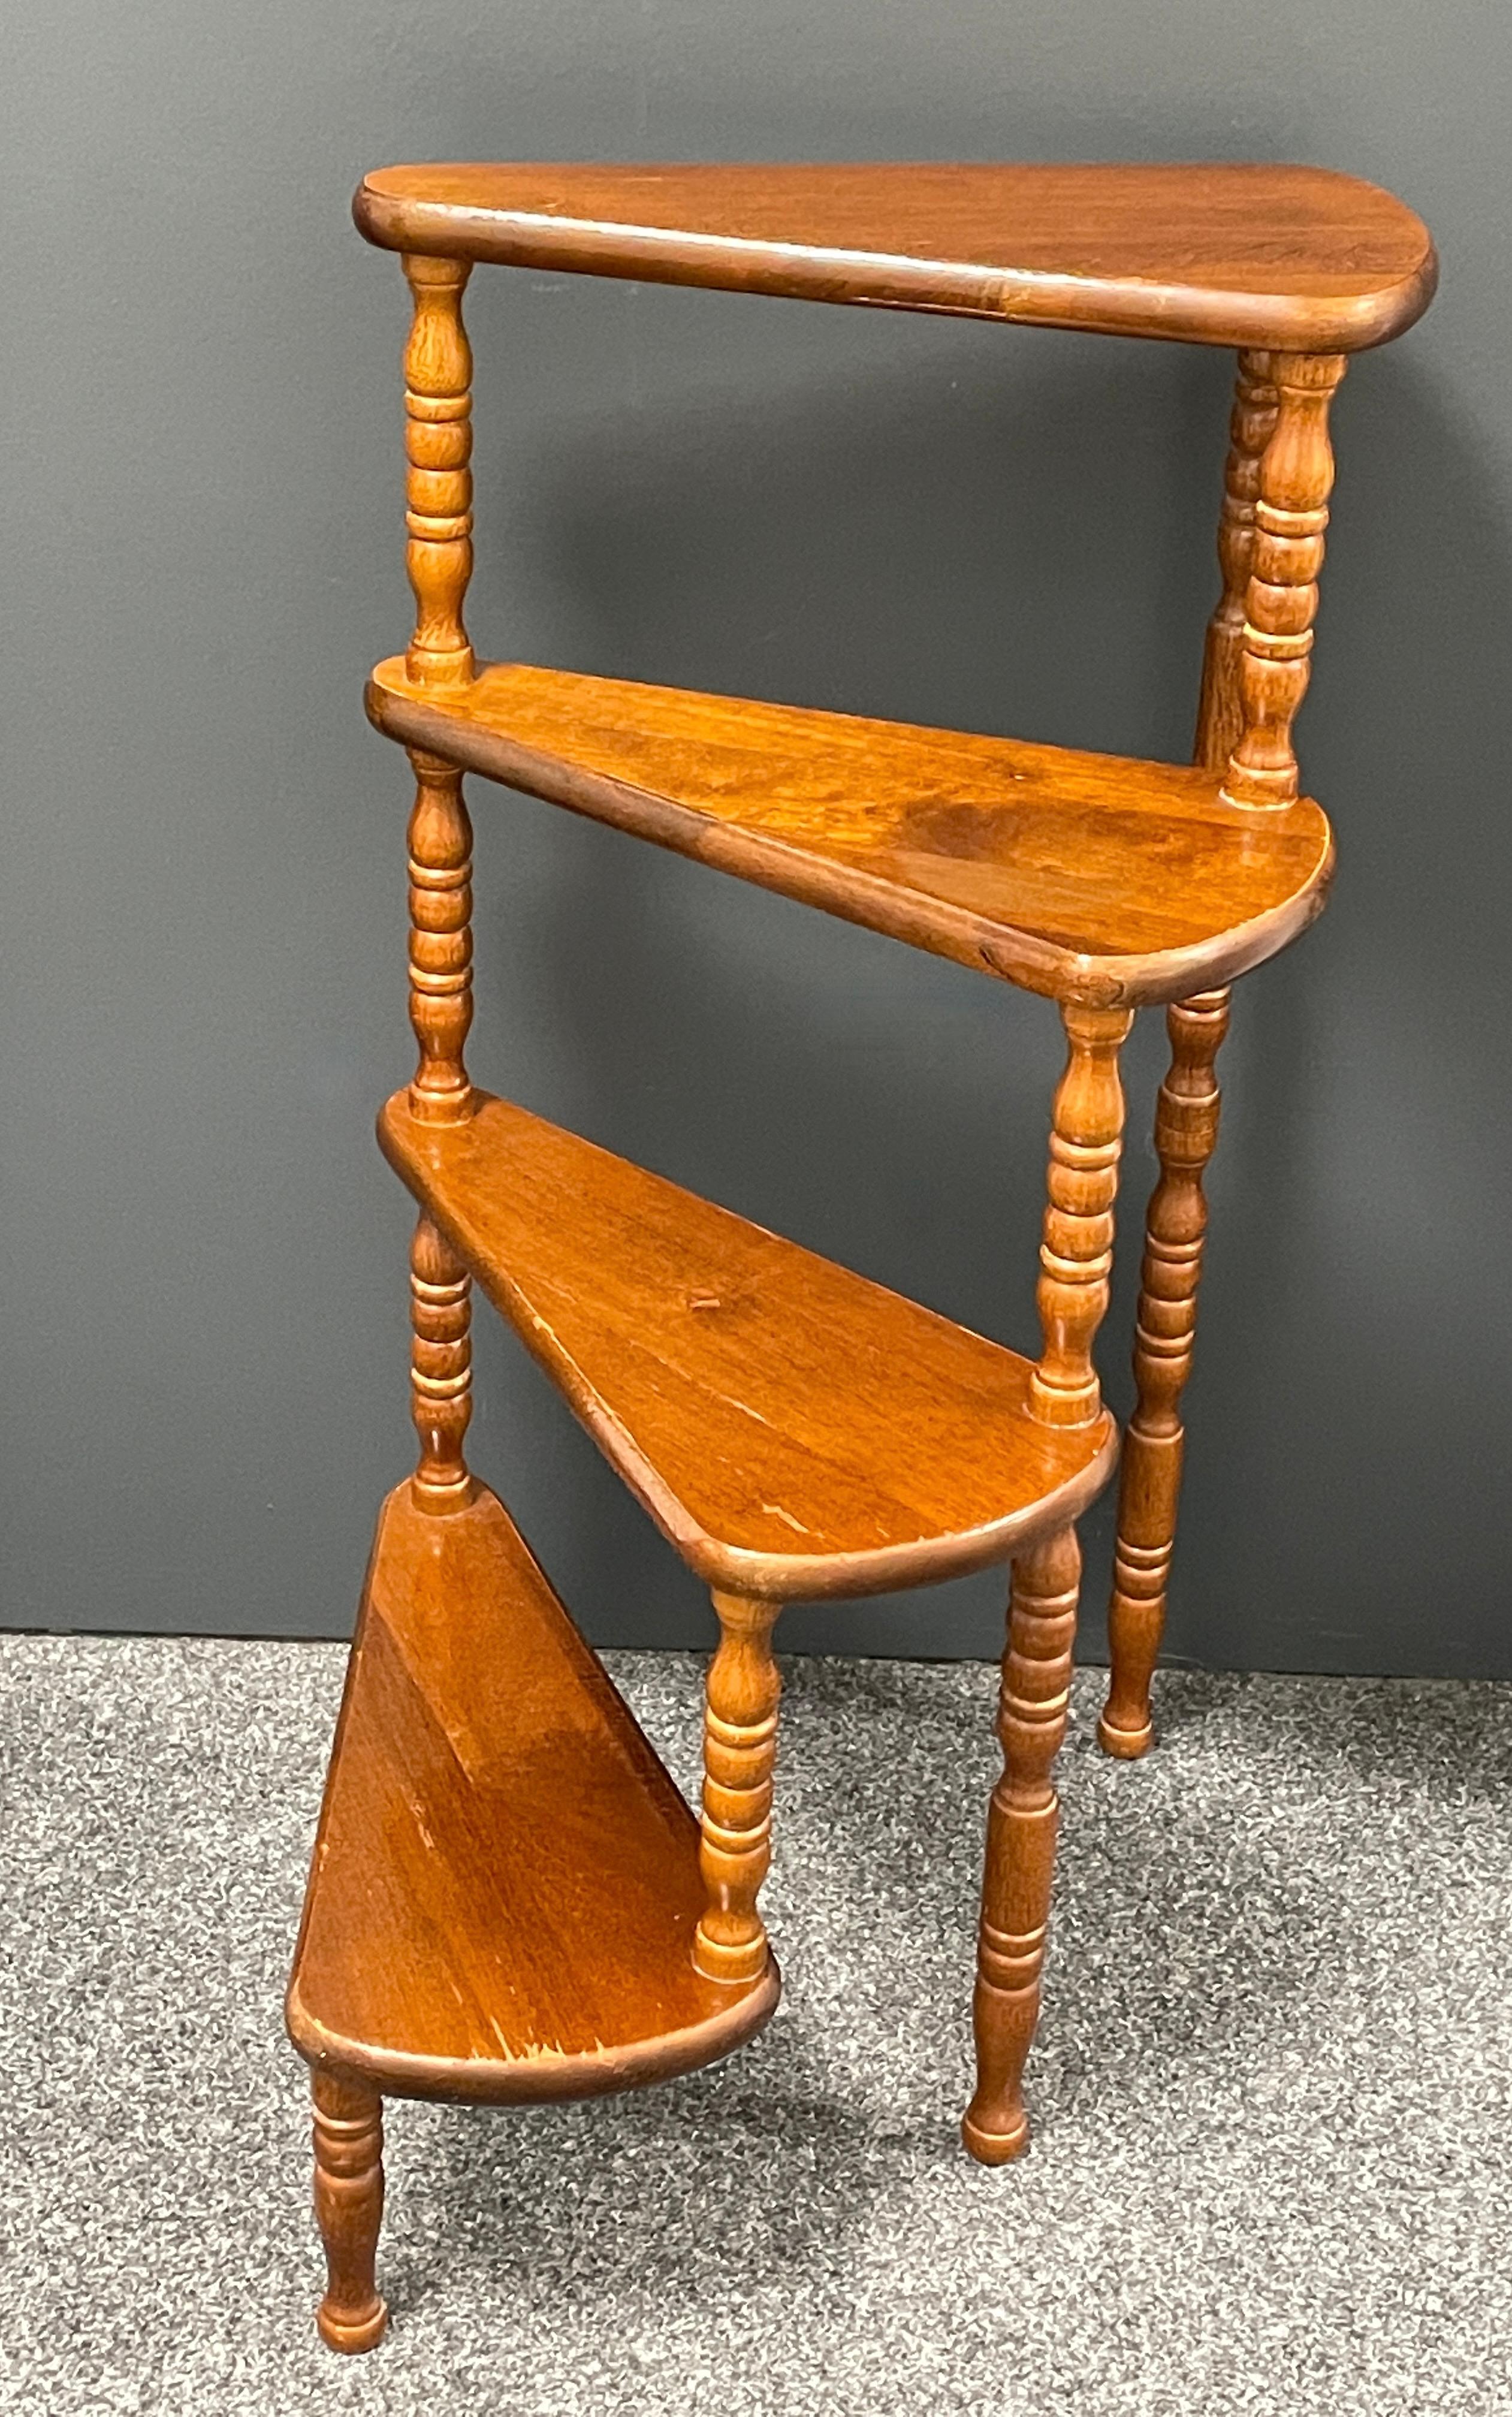 Created in Germany circa 1960s to 1970s and standing on turned legs, the circular step ladder features four stairs rolled around a turned central post. Versatile and practical, the elegant library essential is in very good used condition with a nice